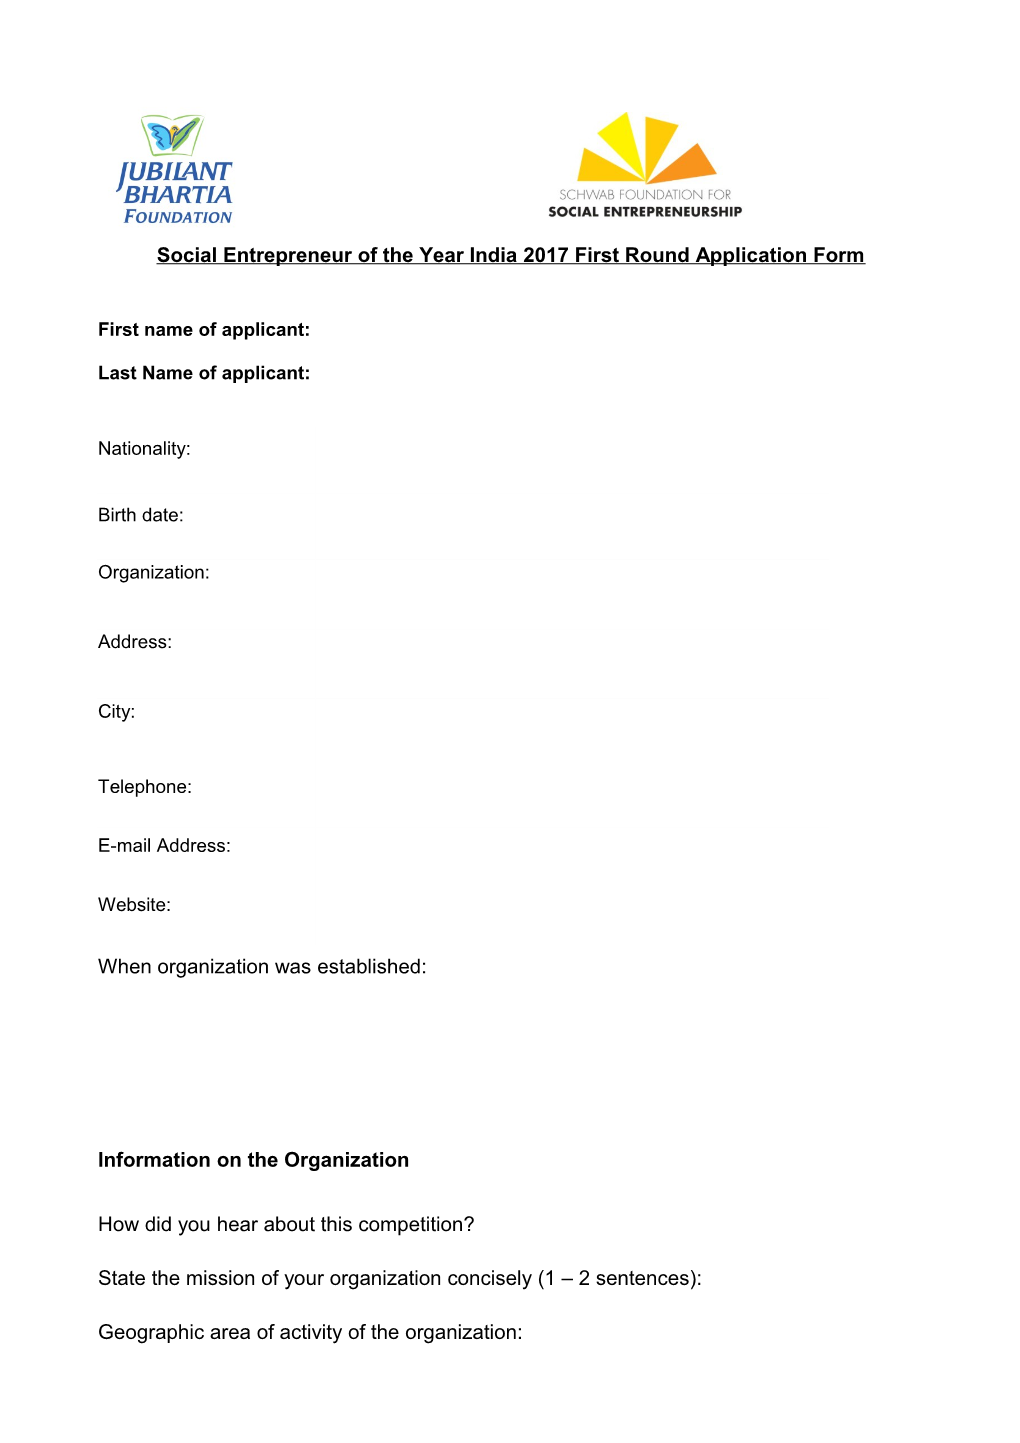 Social Entrepreneur of the Year India 2017 First Round Application Form